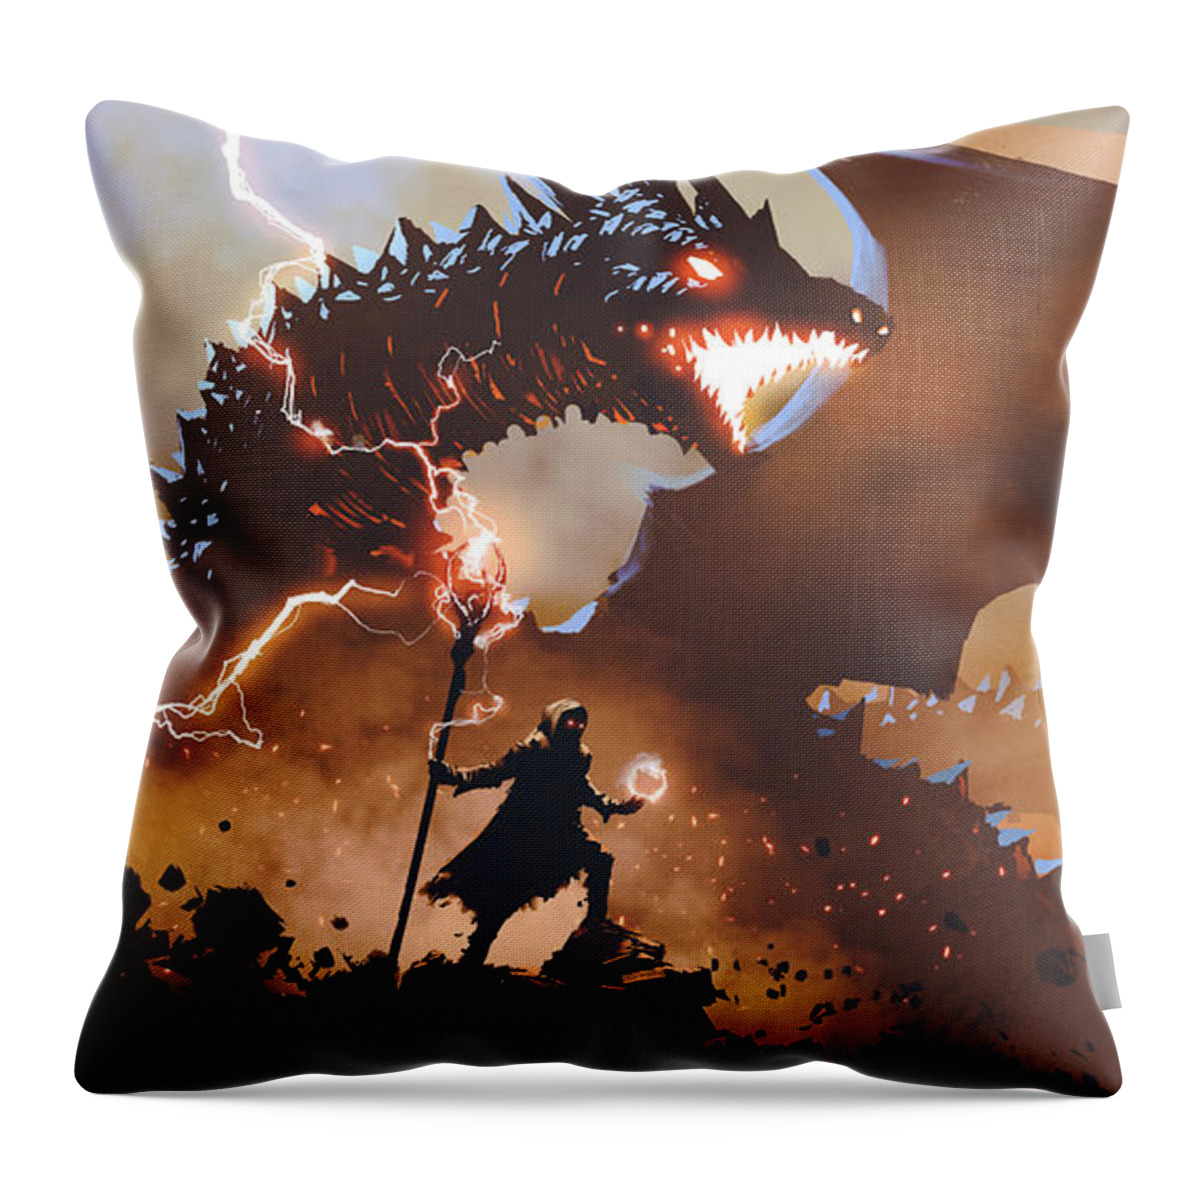 Illustration Throw Pillow featuring the painting The Dragon Wizard by Tithi Luadthong